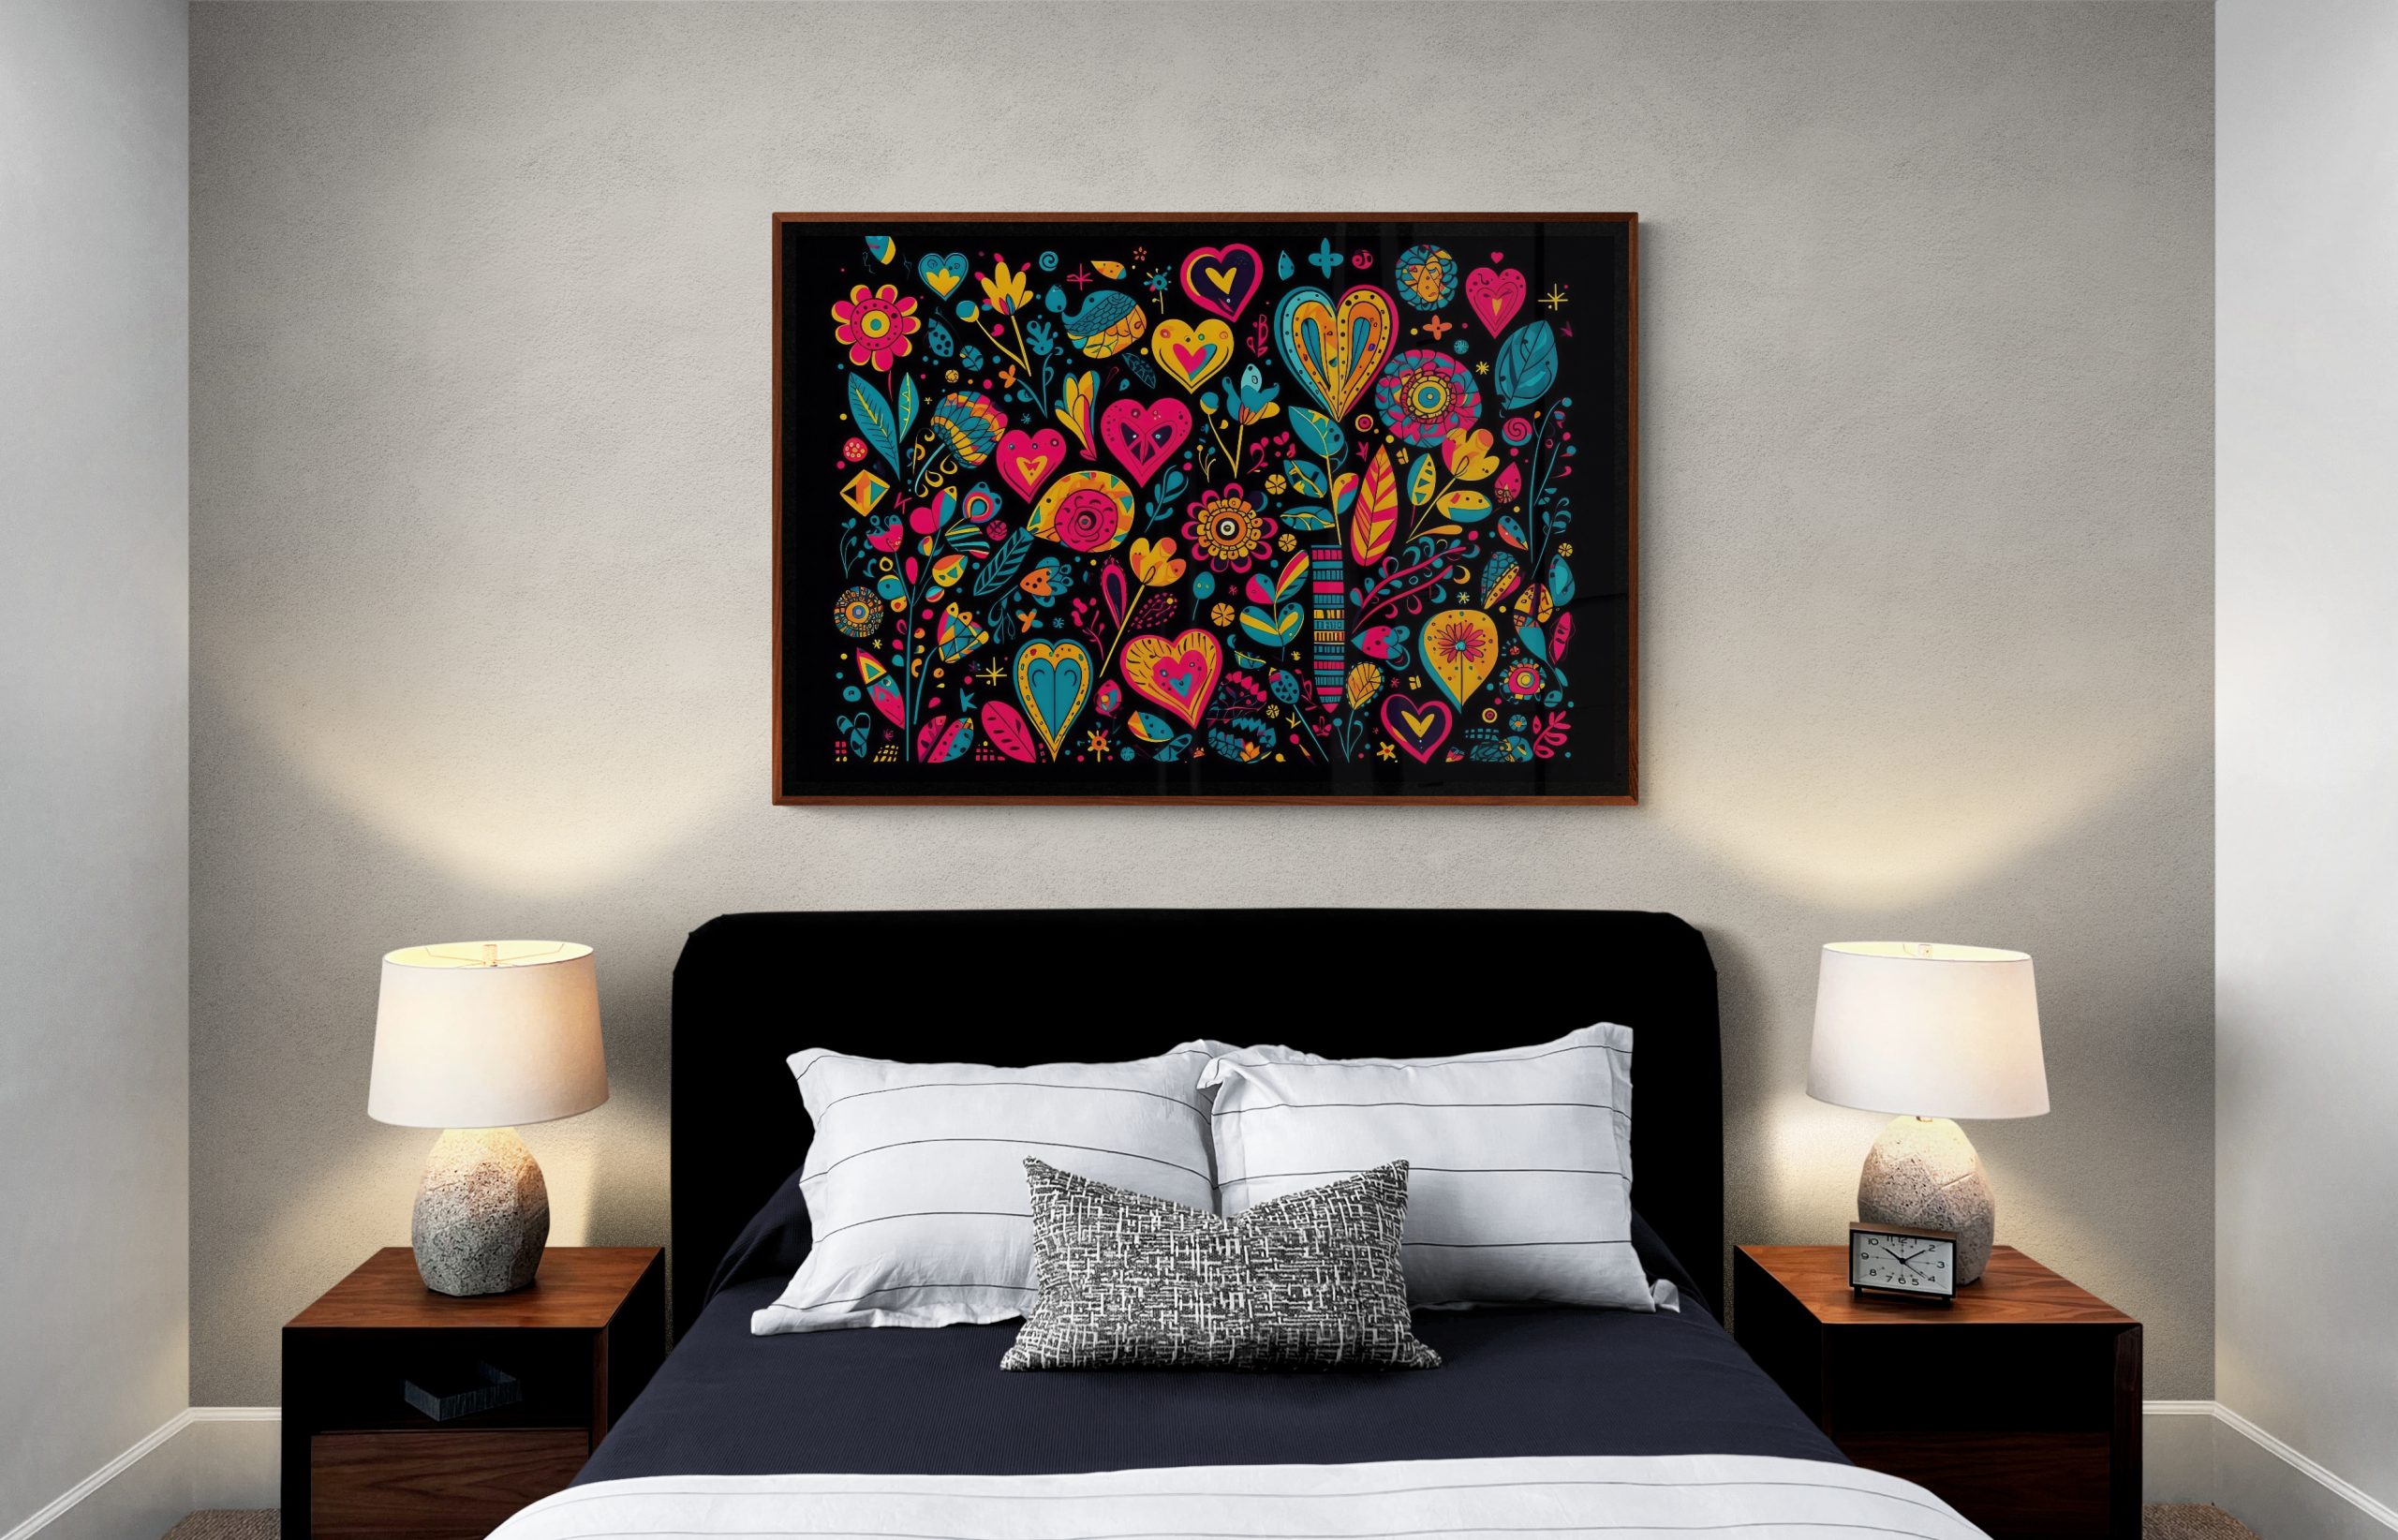 Sneak Peek – Life is Art, Paint Your Dreams with Colours & Hearts Signature Series